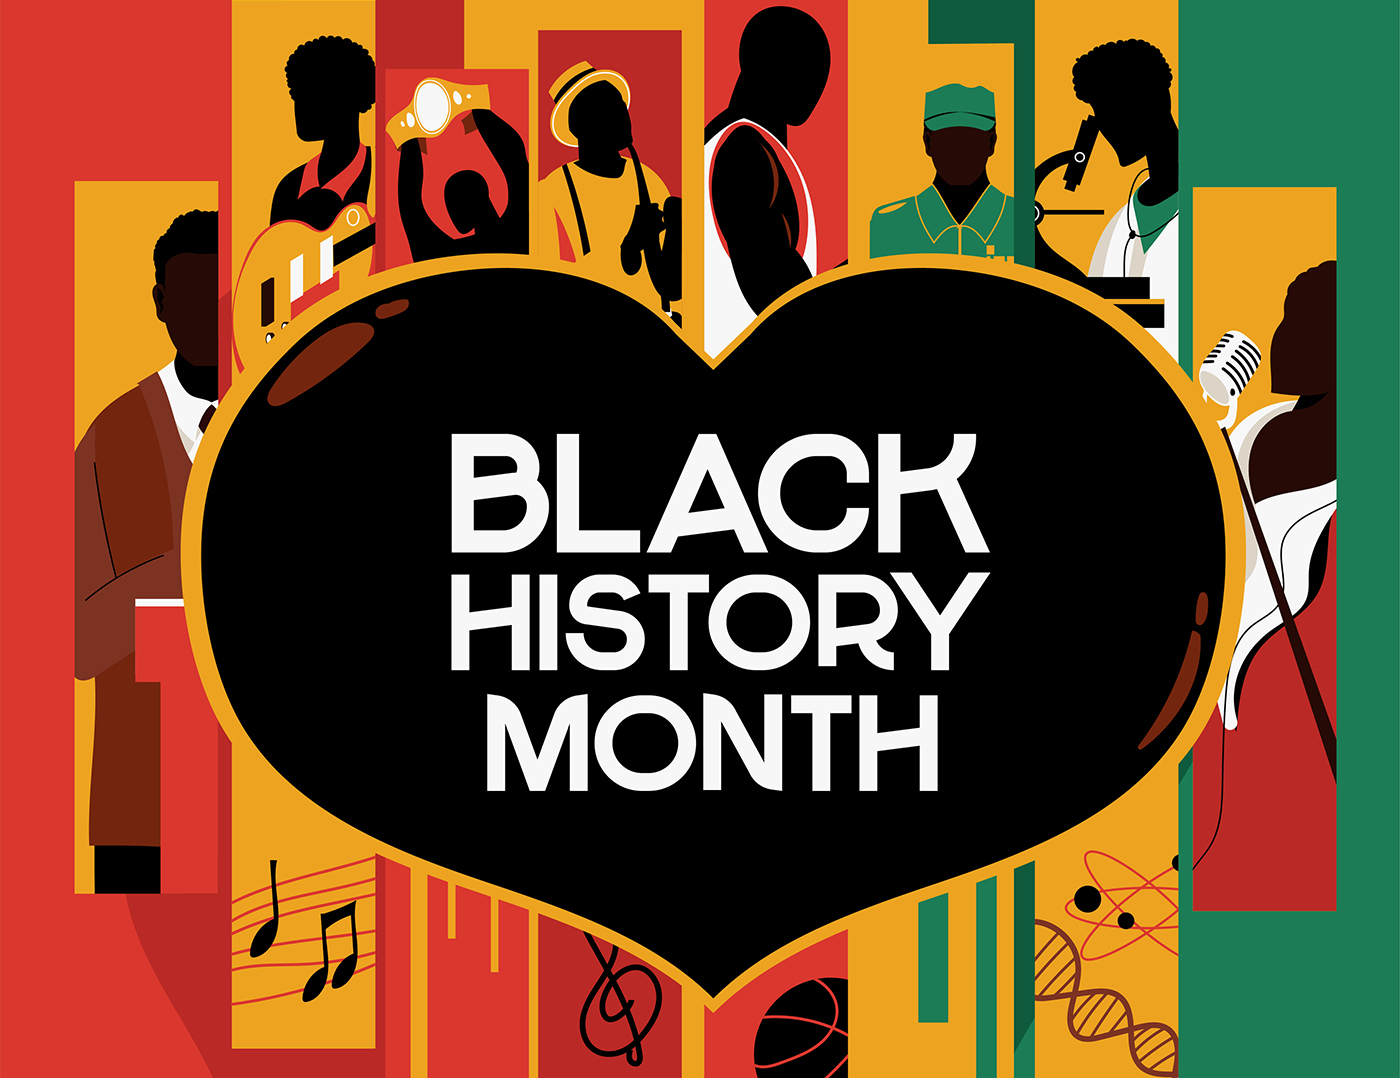 A drawing to celebrate Black History Month, showing stylized images of various professions, from science, teaching and music, to athletics and the military